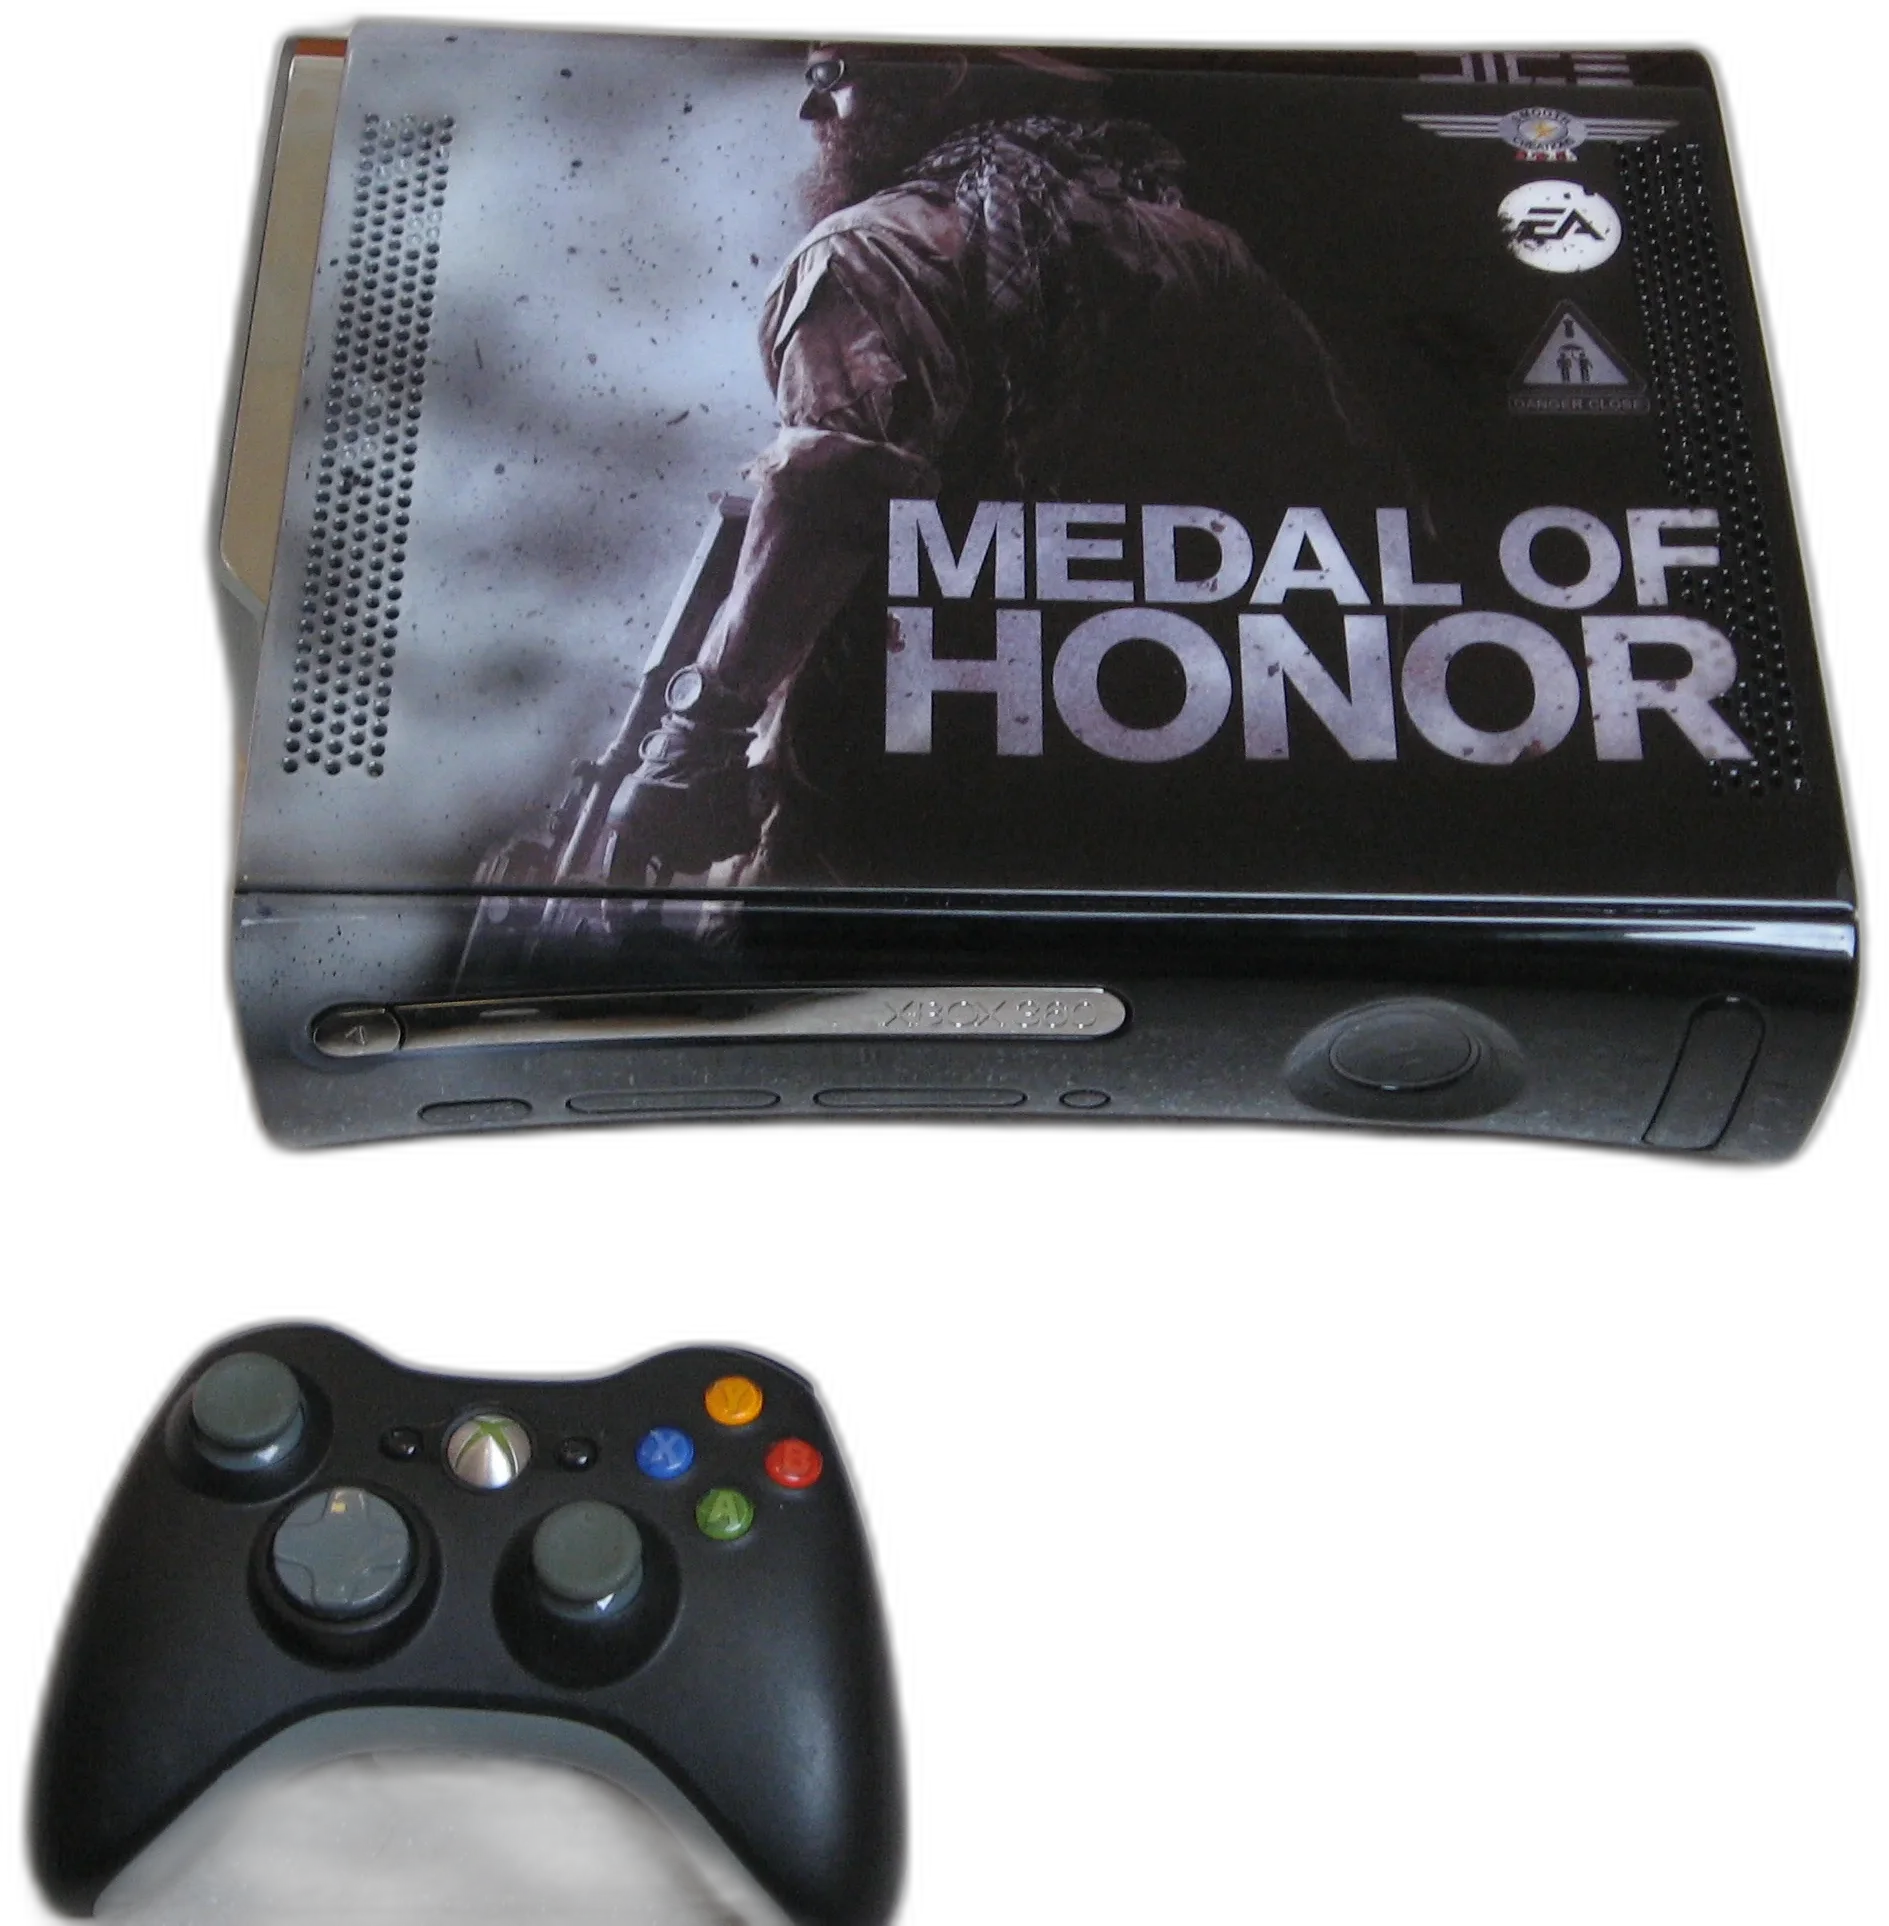  Microsoft Xbox 360 Medal Of Honor Suitcase Console